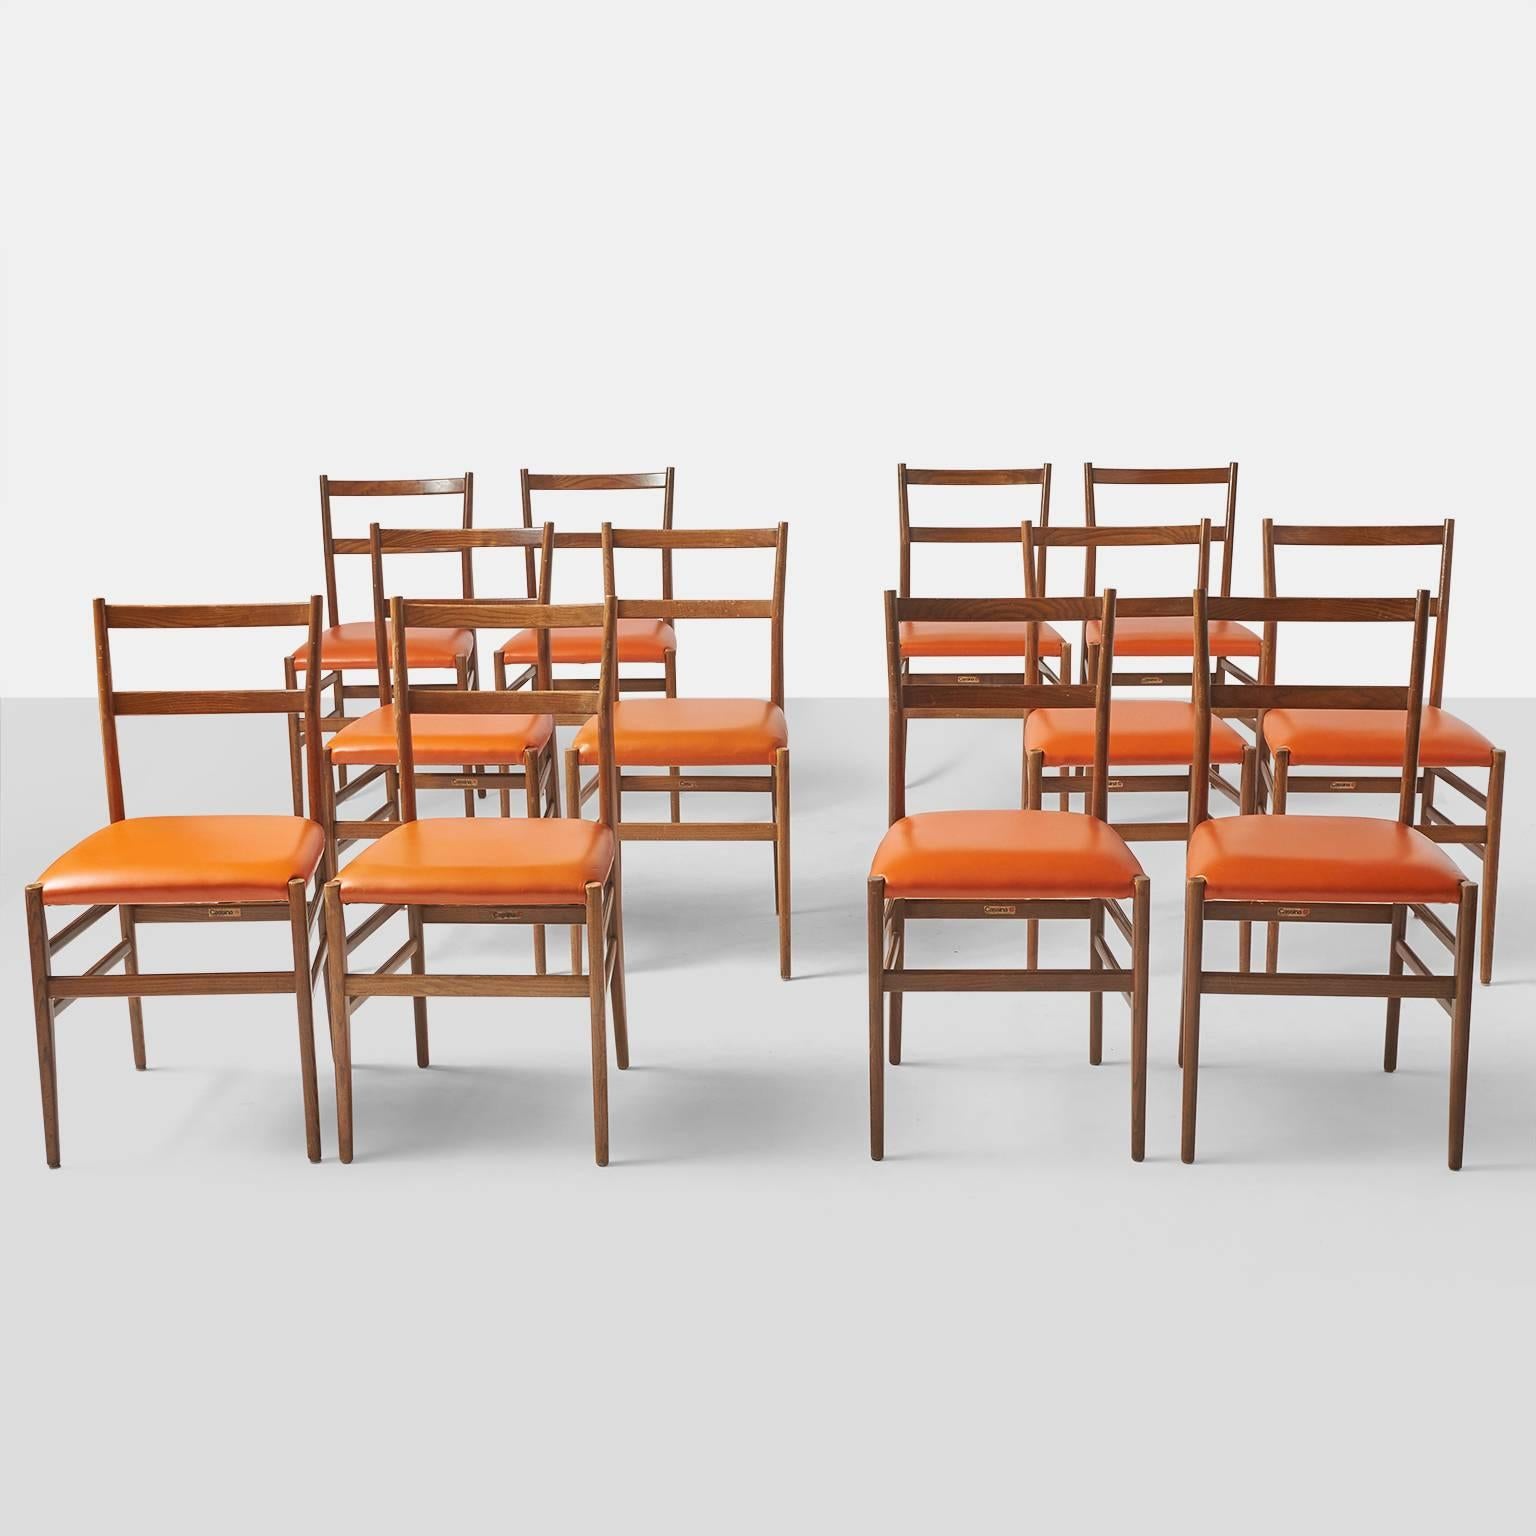 A set of 12 Leggera chairs by Gio Ponti for Cassina retaining the original labels. Seats have been upholstered in an orange faux leather and the frames are in a light ash.
Note: Chairs are priced and sold in sets of 2 chairs.